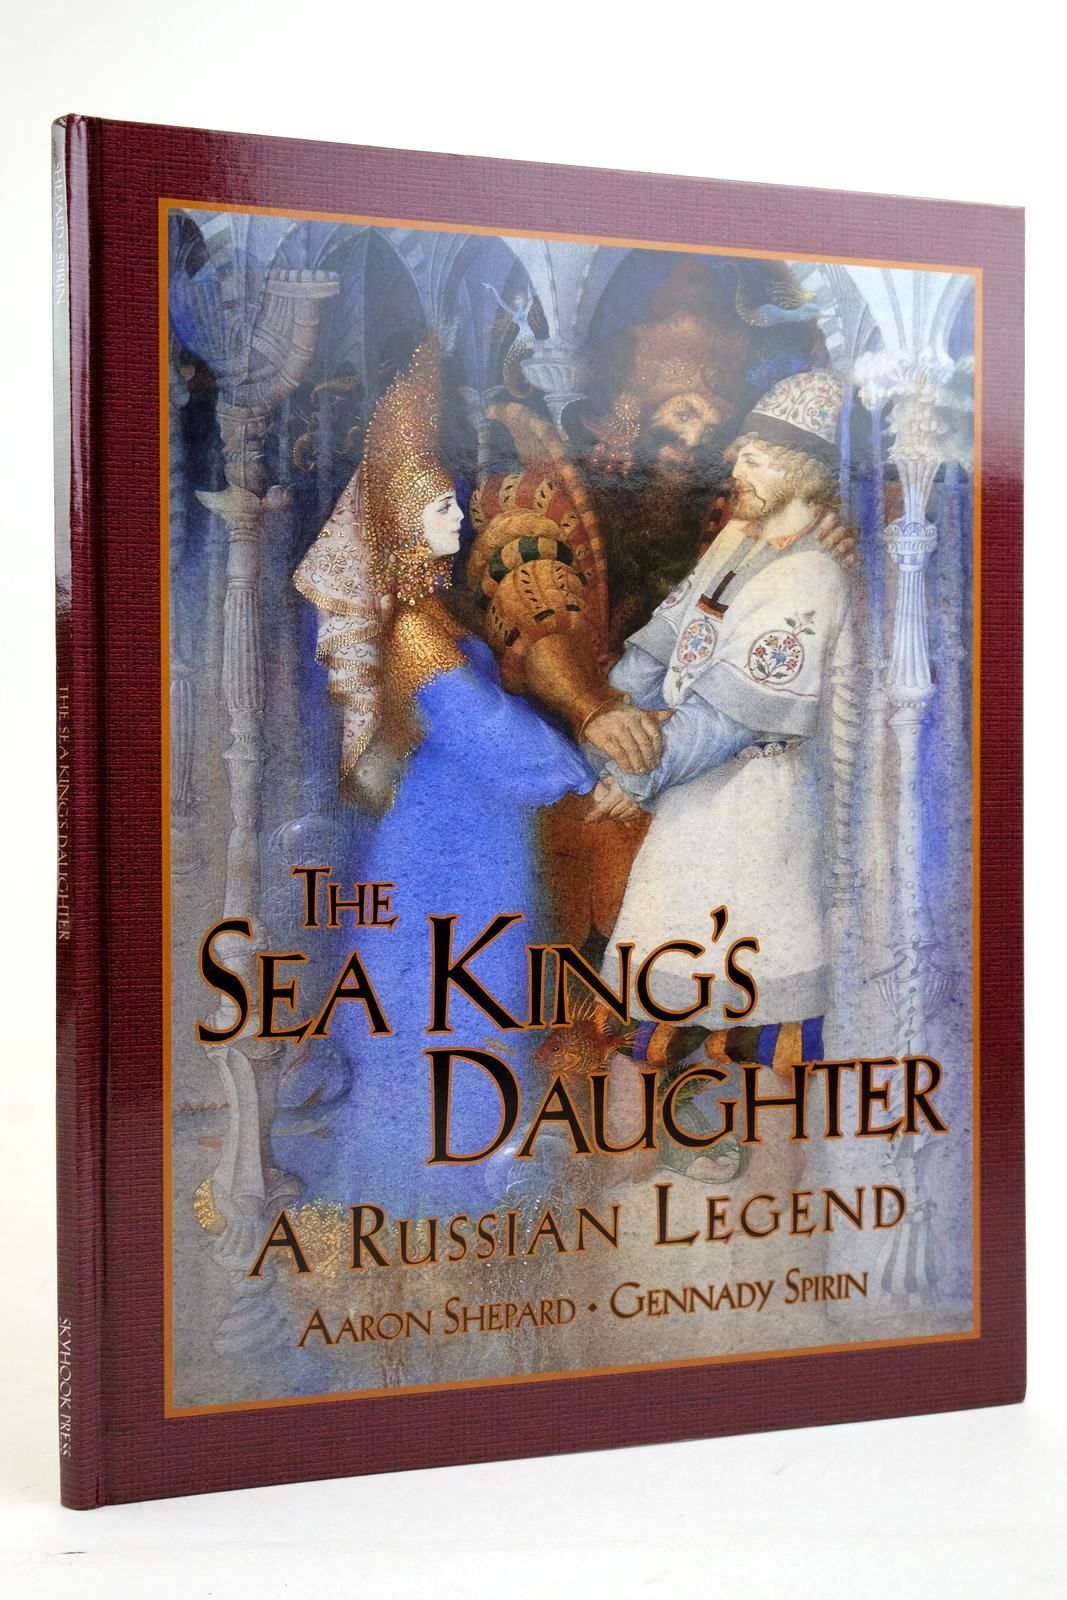 Photo of THE SEA KING'S DAUGHTER written by Shepard, Aaron illustrated by Spirin, Gennady published by Skyhook Press (STOCK CODE: 2135974)  for sale by Stella & Rose's Books